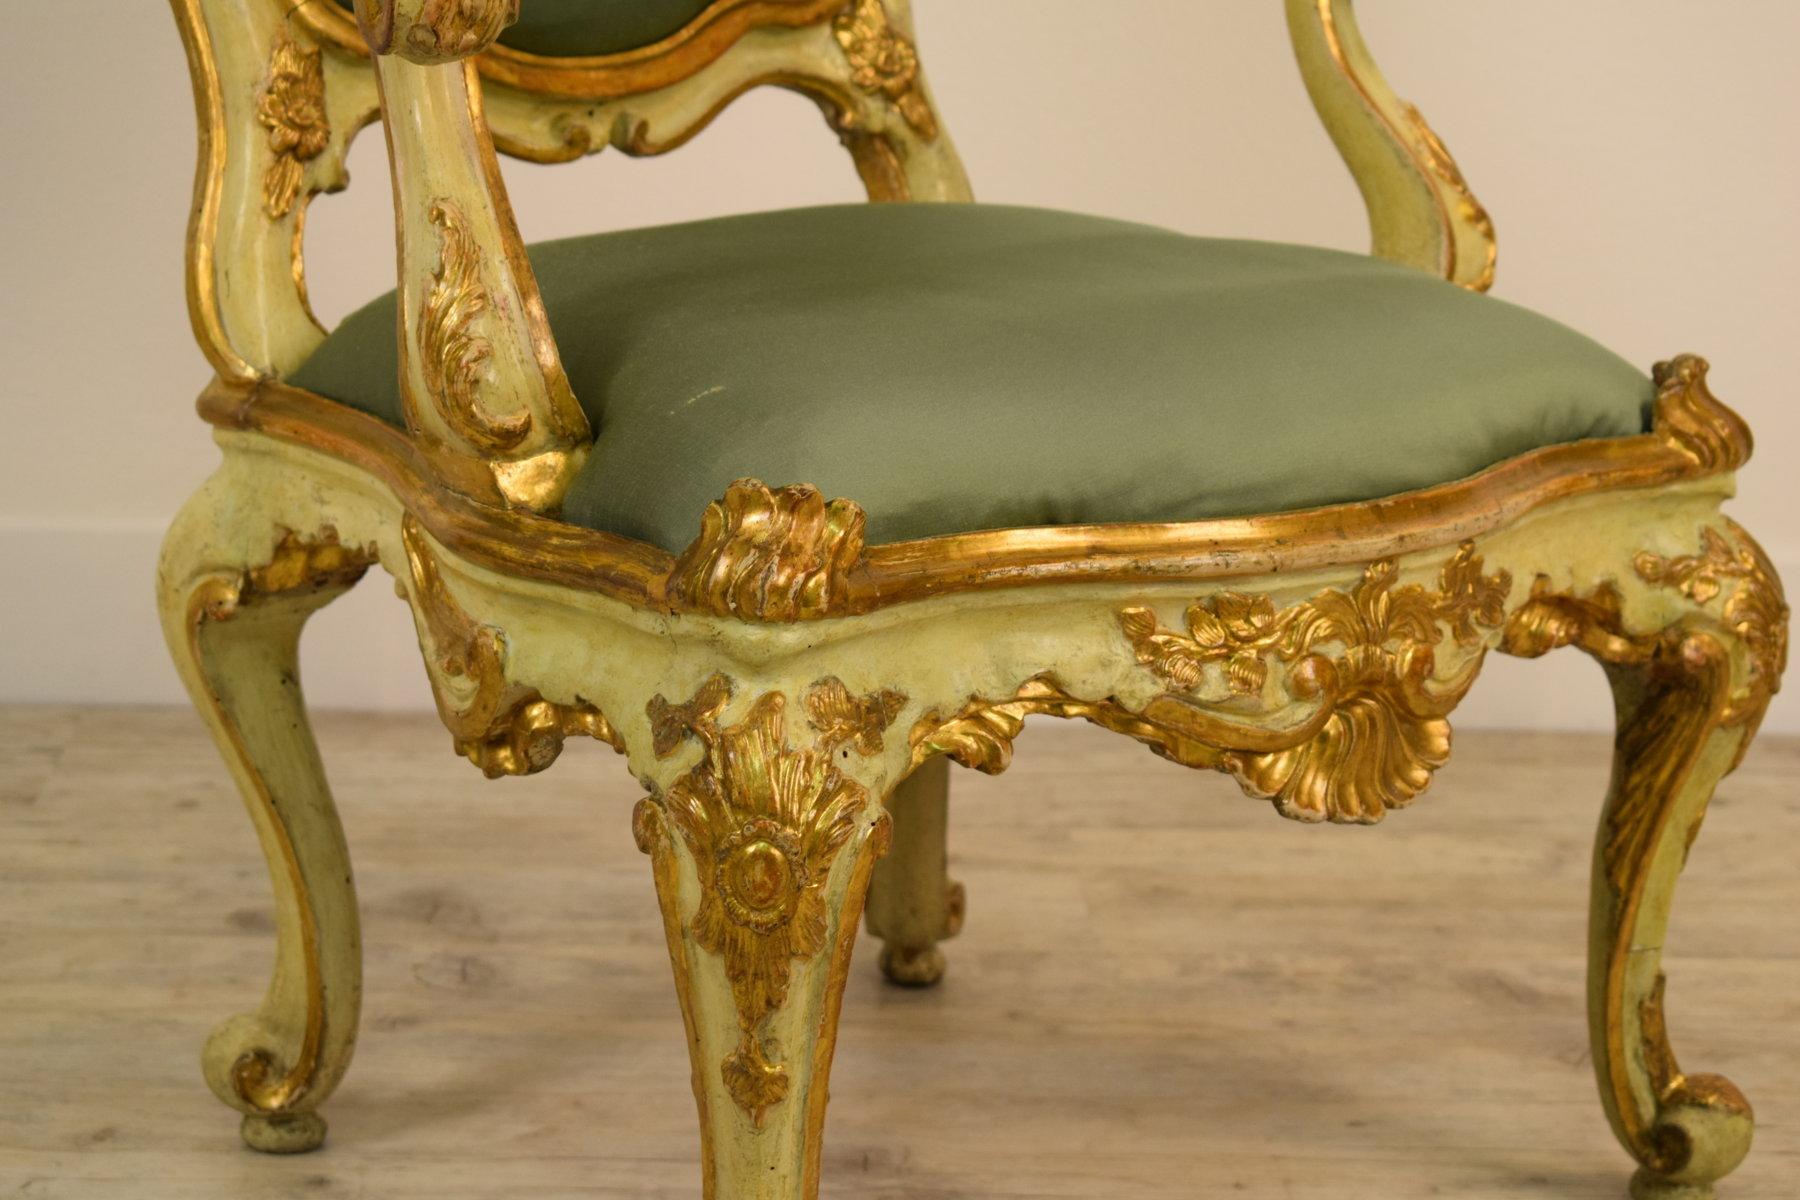 Hand-Carved 18th Century Venetian Lacquered and Gilded Wood Armchair